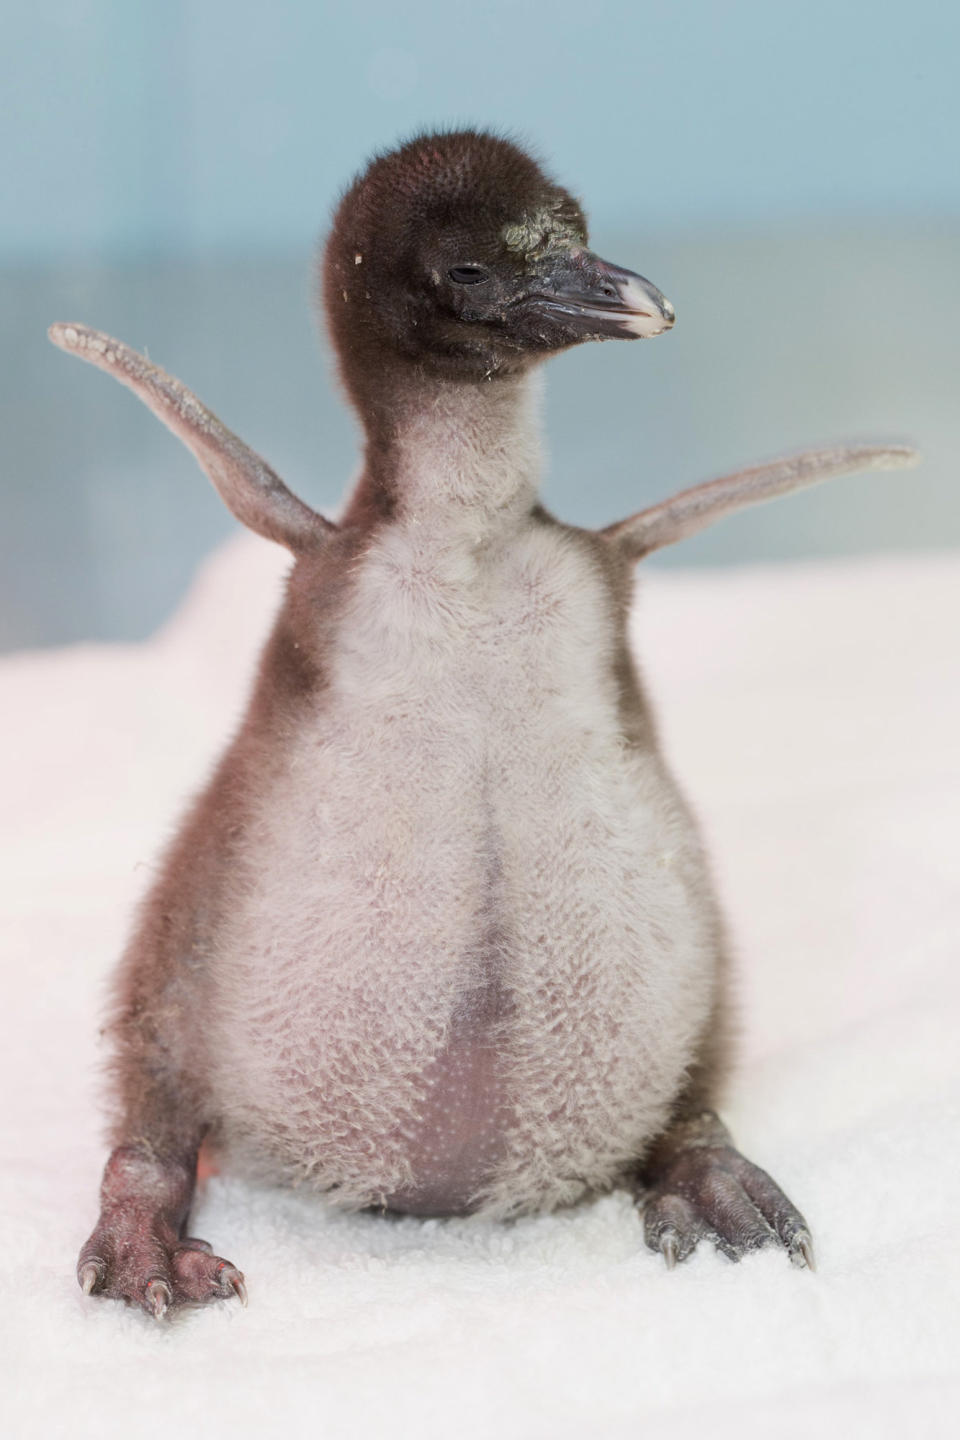 This June 18, 2013 photo provided by the Shedd Aquarium in Chicago shows a rockhopper penguin chick that was hatched at the aquarium on June 12, 2013. (AP Photo/Shedd Aquarium, Brenna Hernandez)